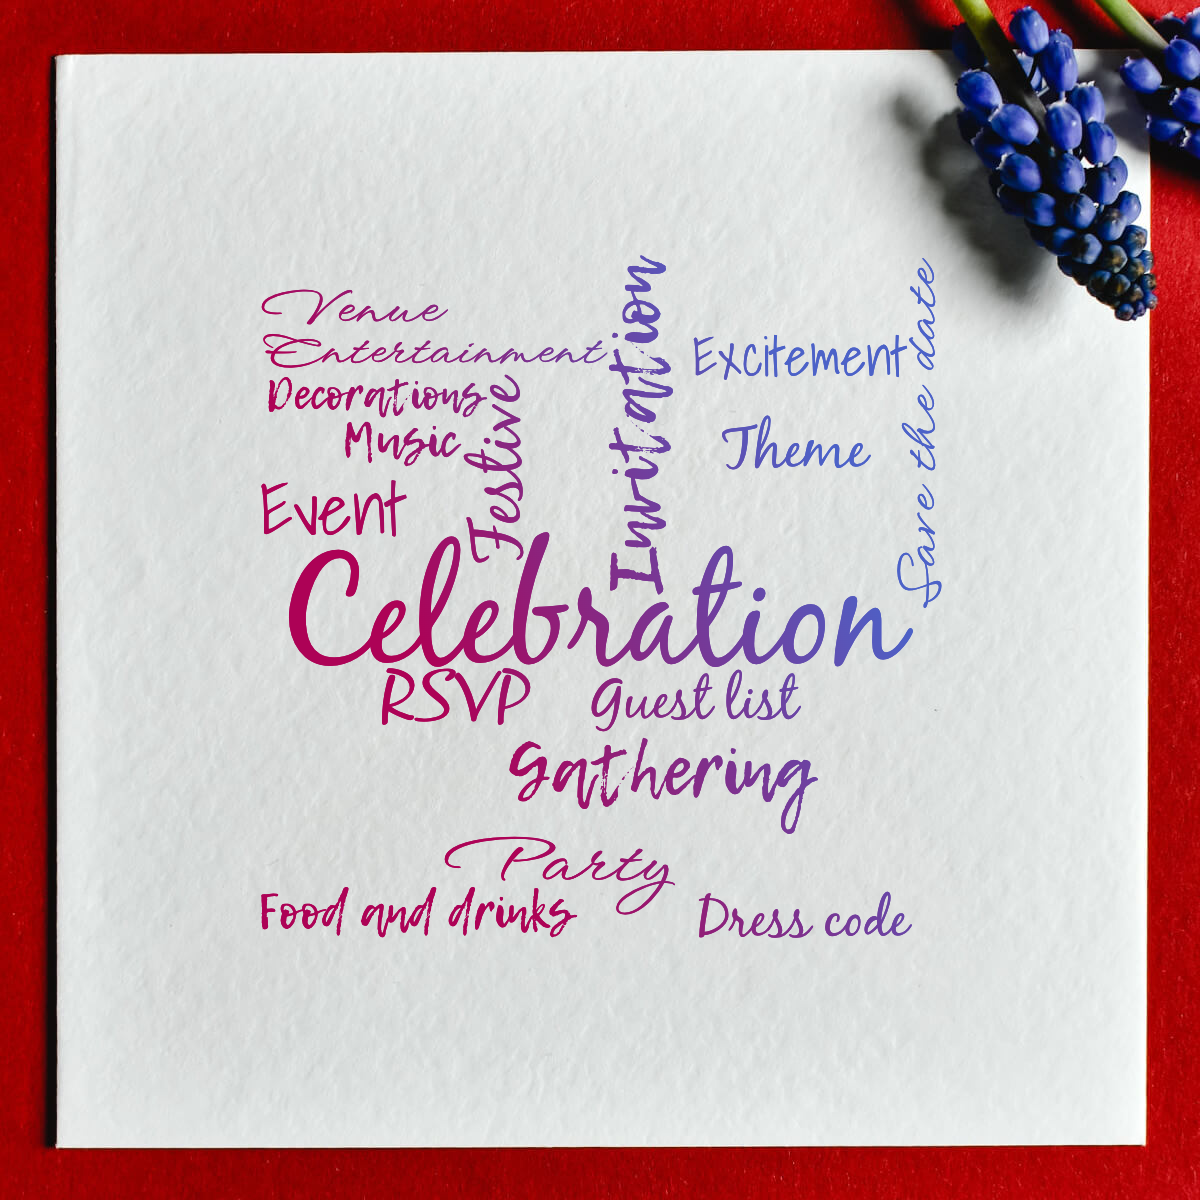 A party invitation card with words arranged in a word cloud